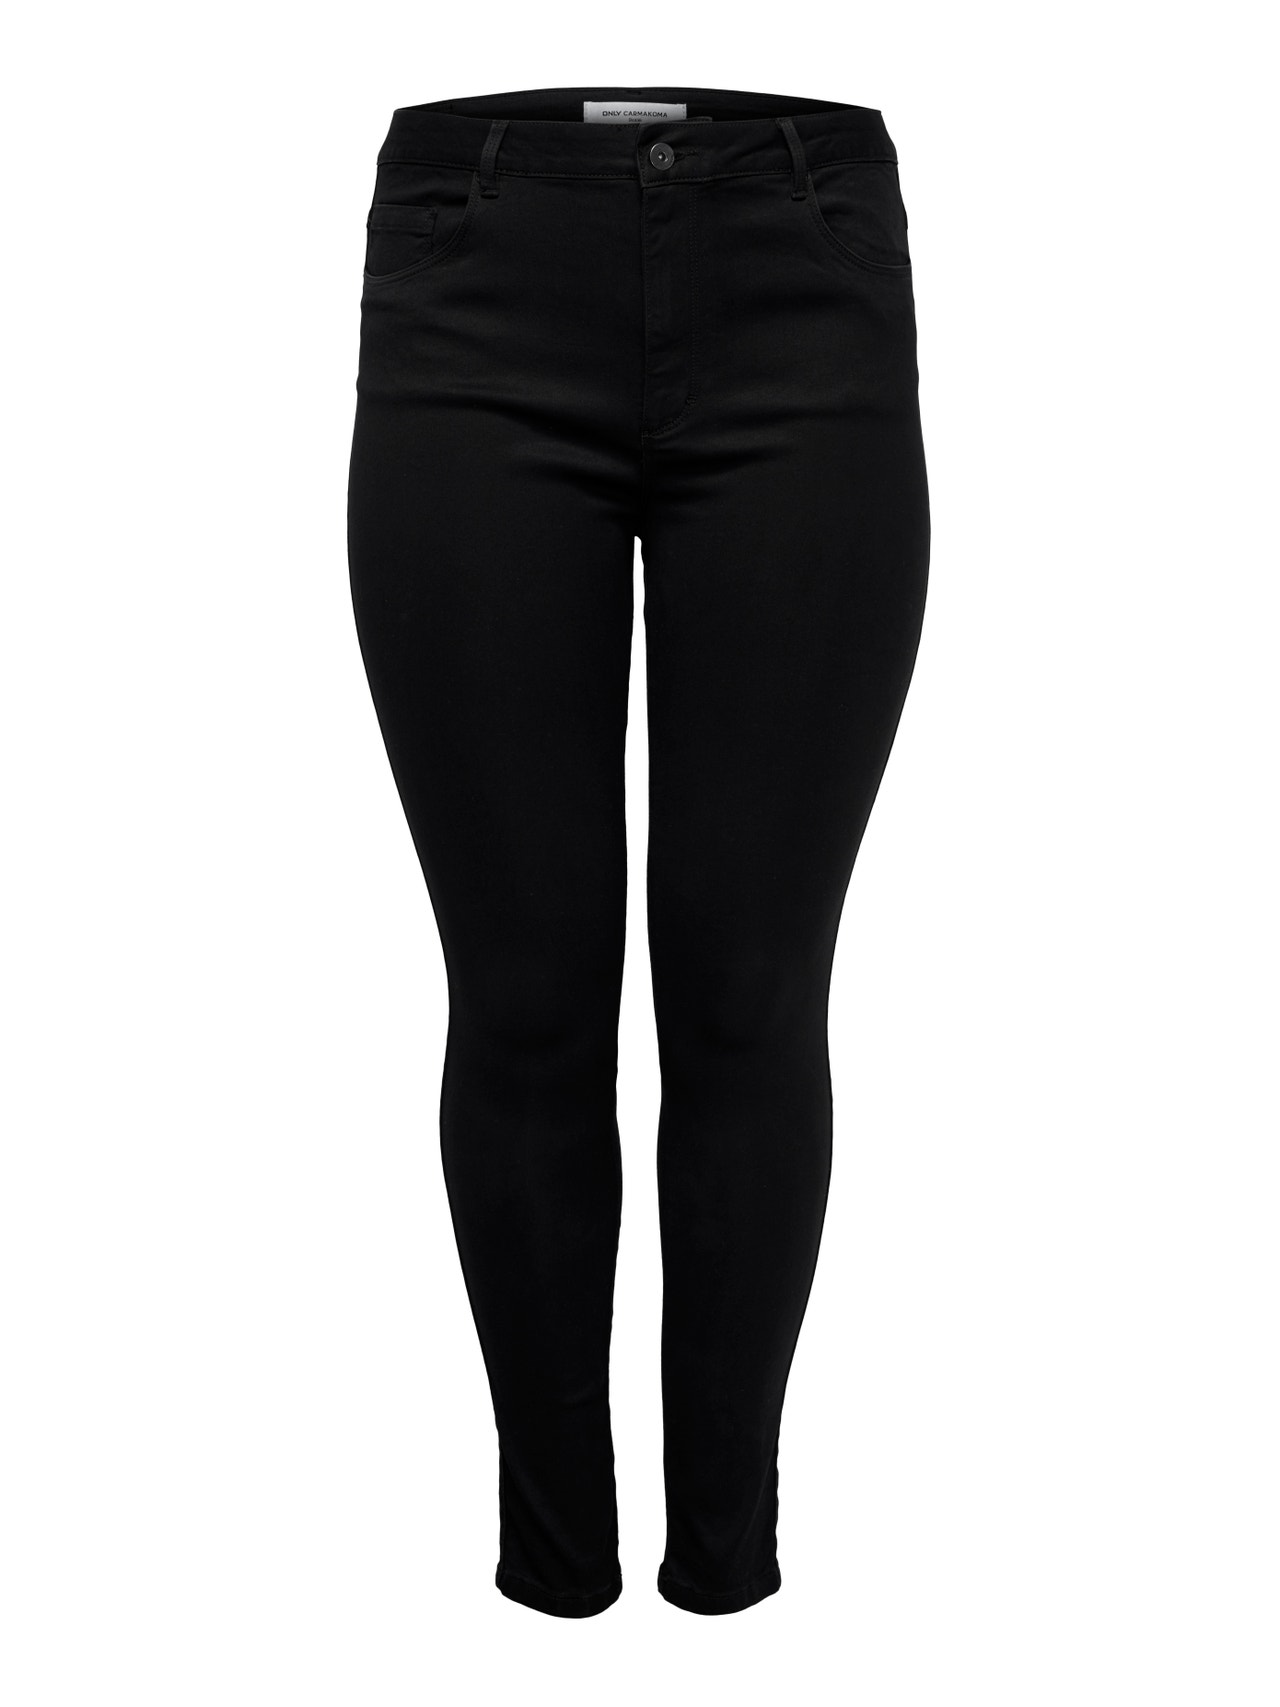 ONLY Curvy caraugusta hw Skinny fit jeans -Black - 15184632